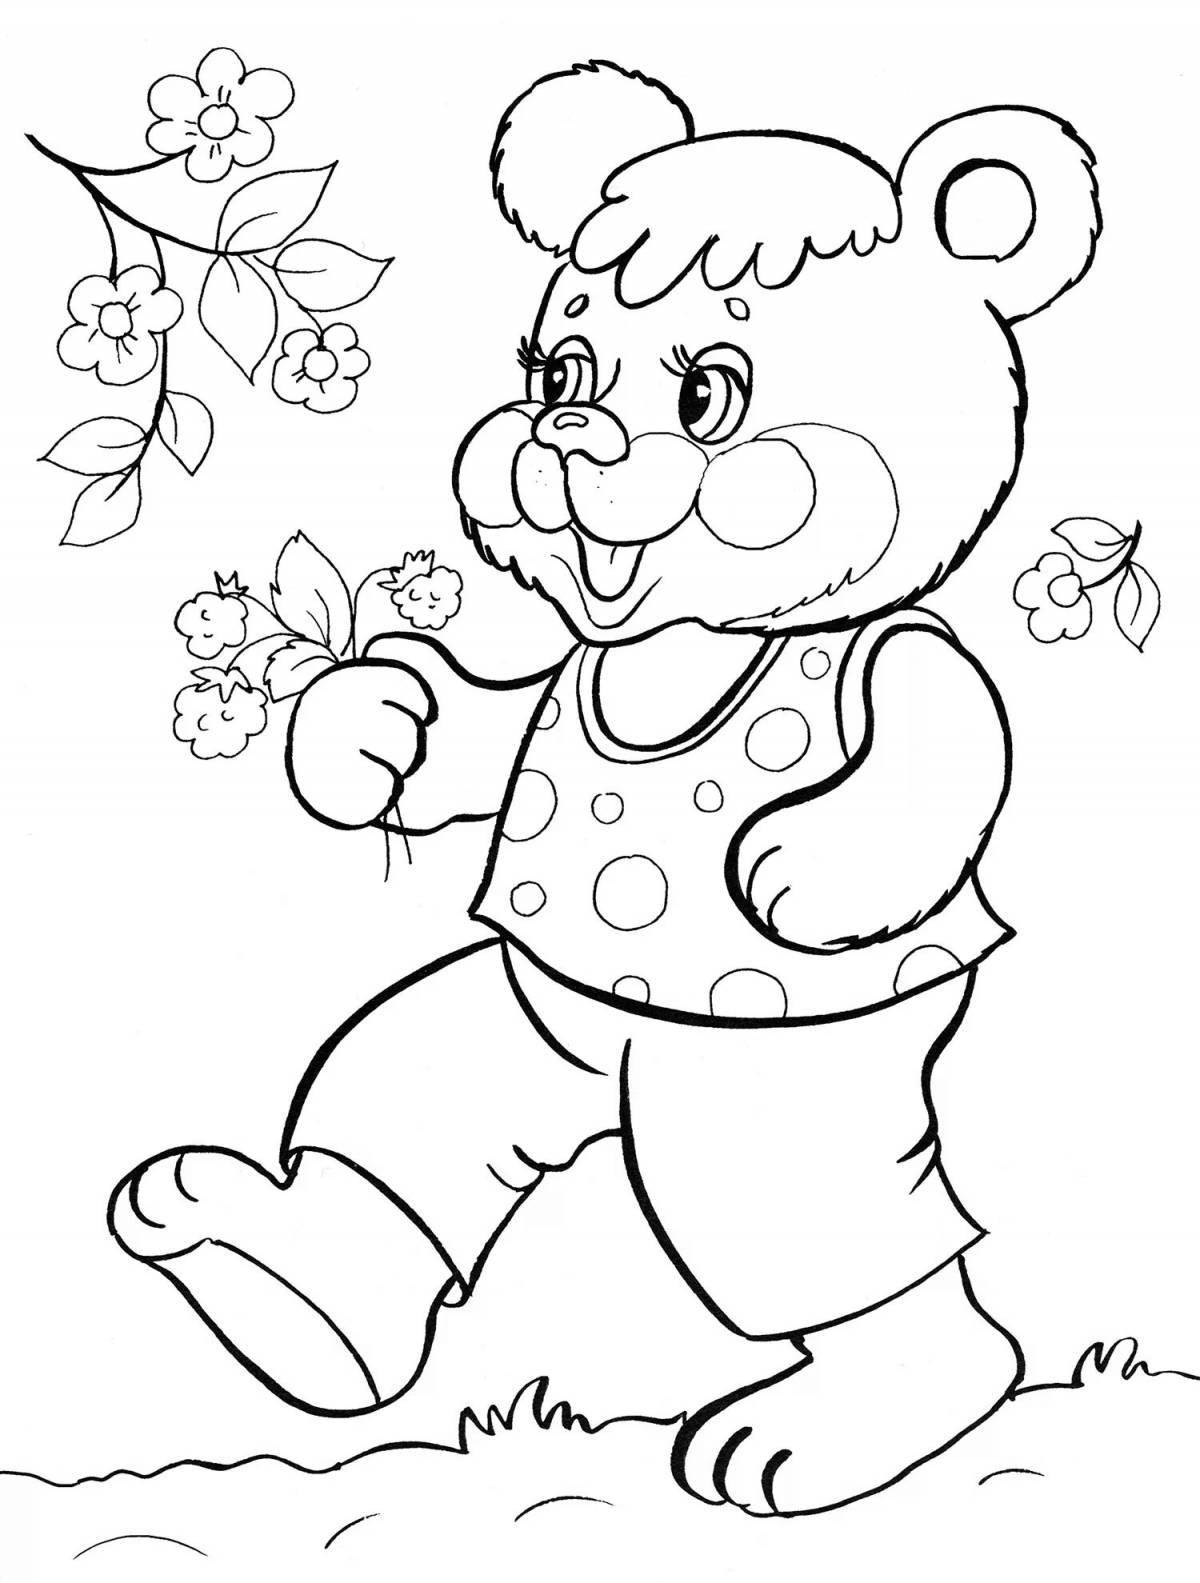 Charming clumsy bear coloring book